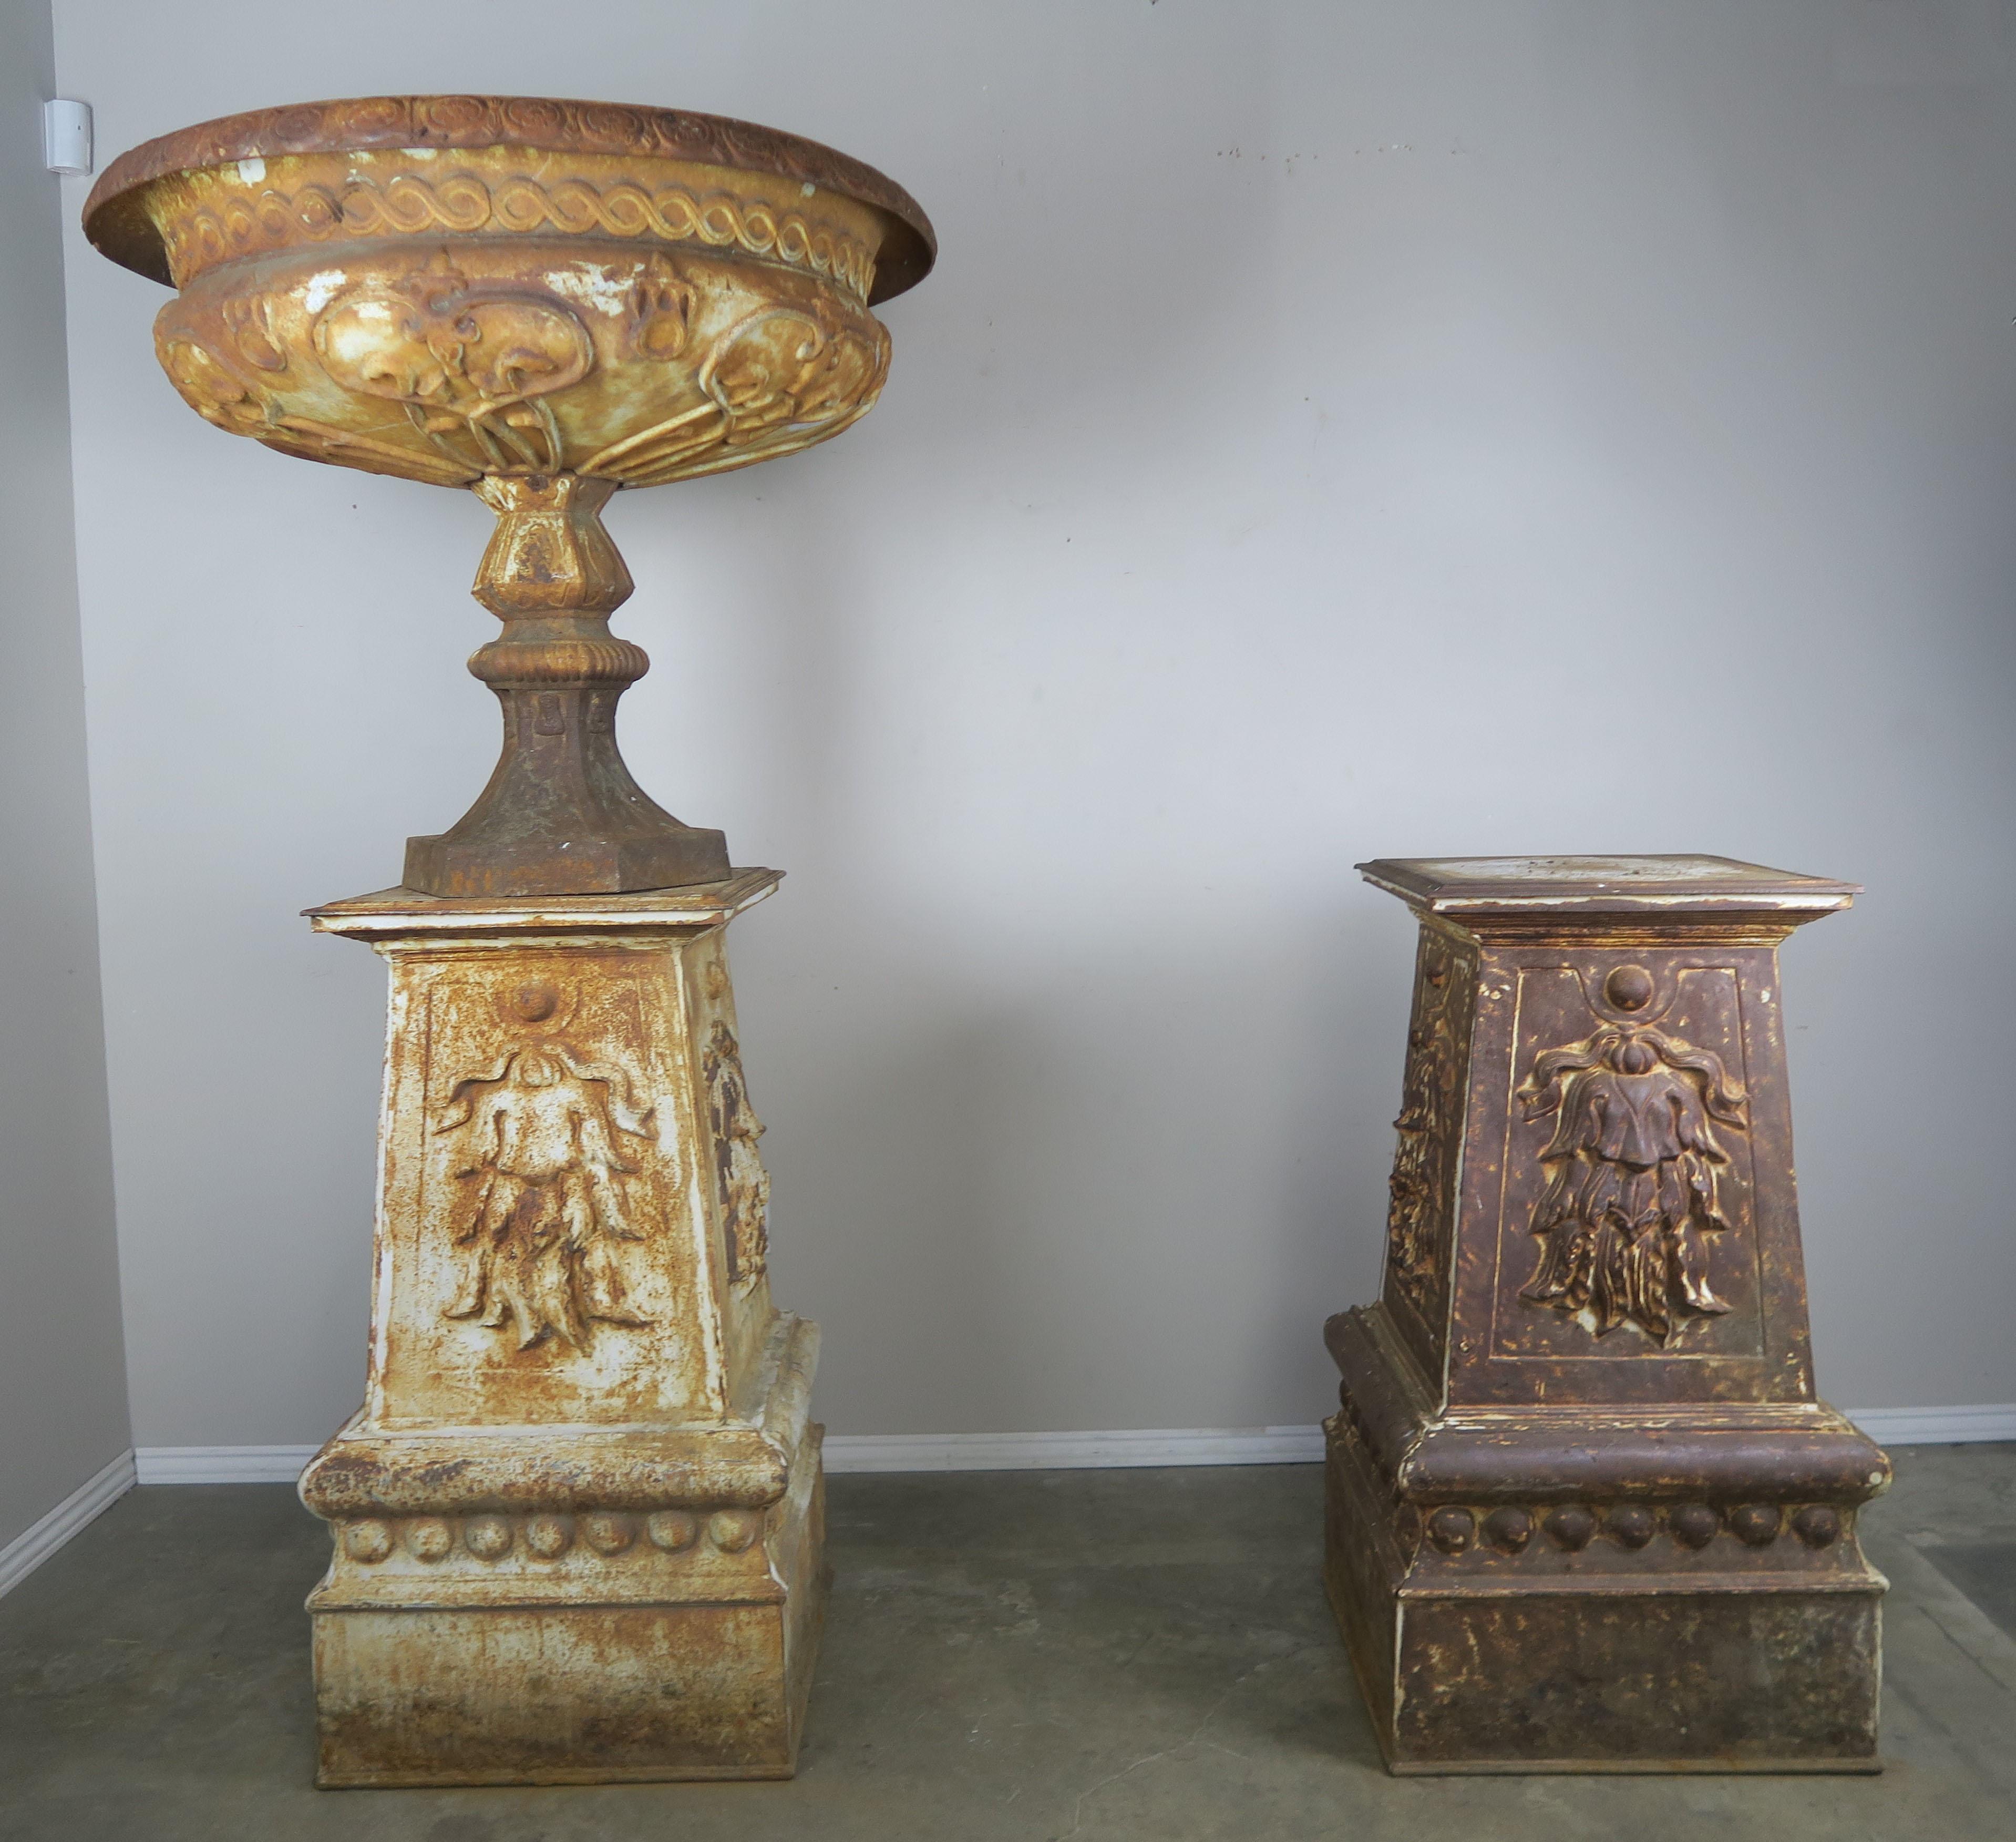 Art Nouveau 19th Century Monumental French Cast Iron Urns on Bases